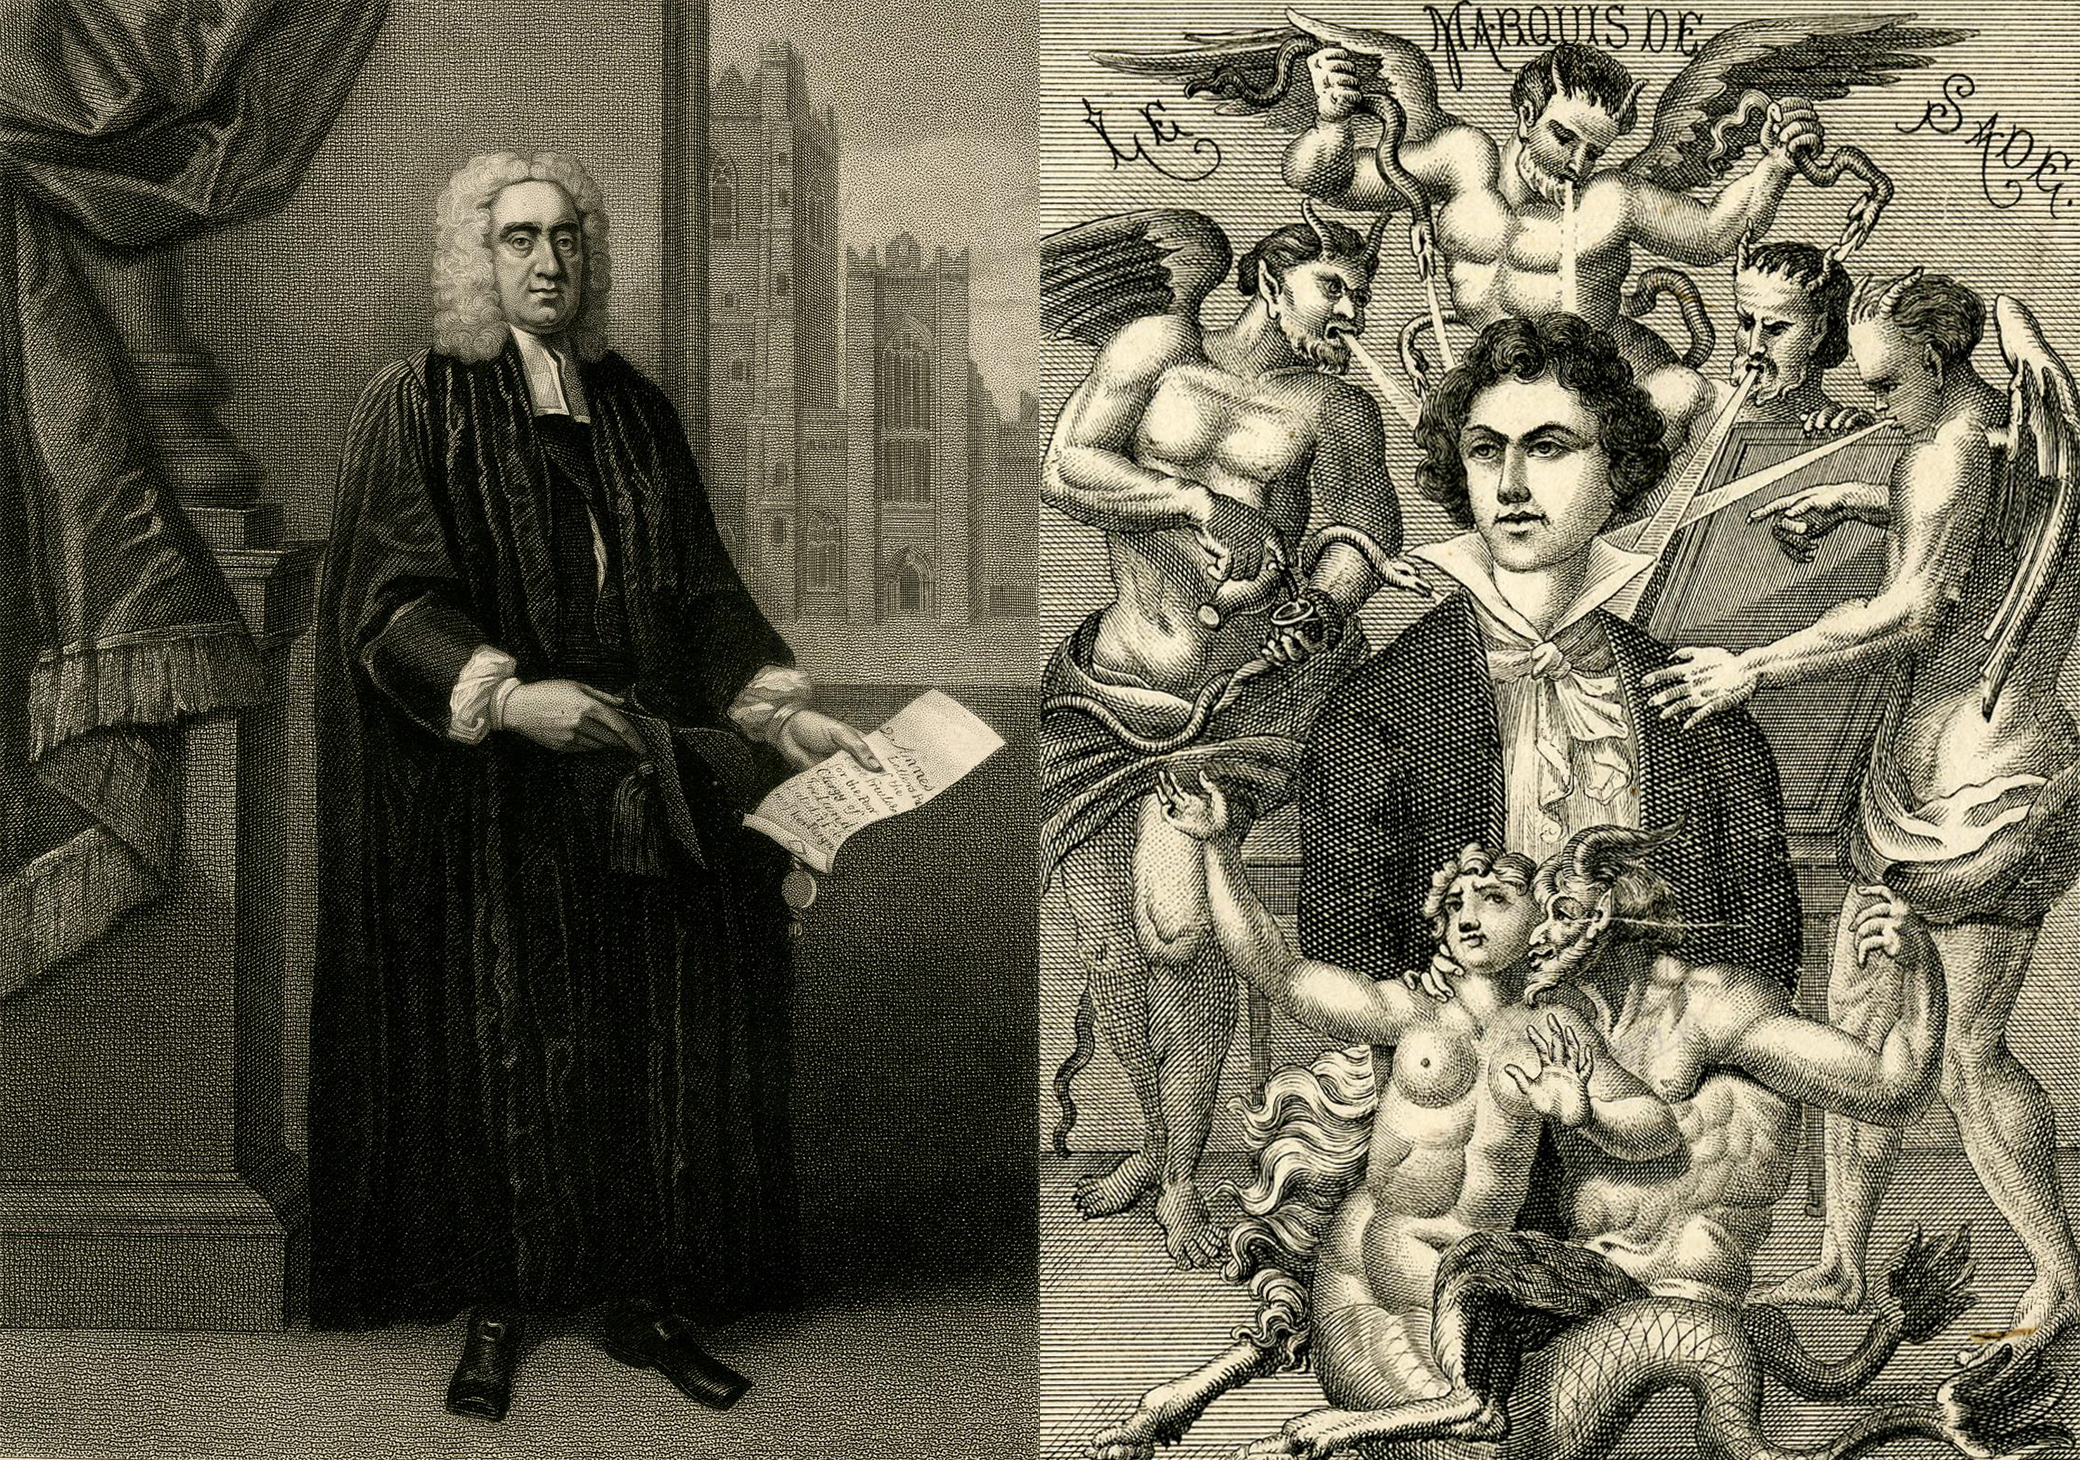 Engravings of Jonathan Swift by Edward Scriven, after Francis Bindon, 1818, and of the Marquis de Sade, by H. Biberstein, nineteenth century.